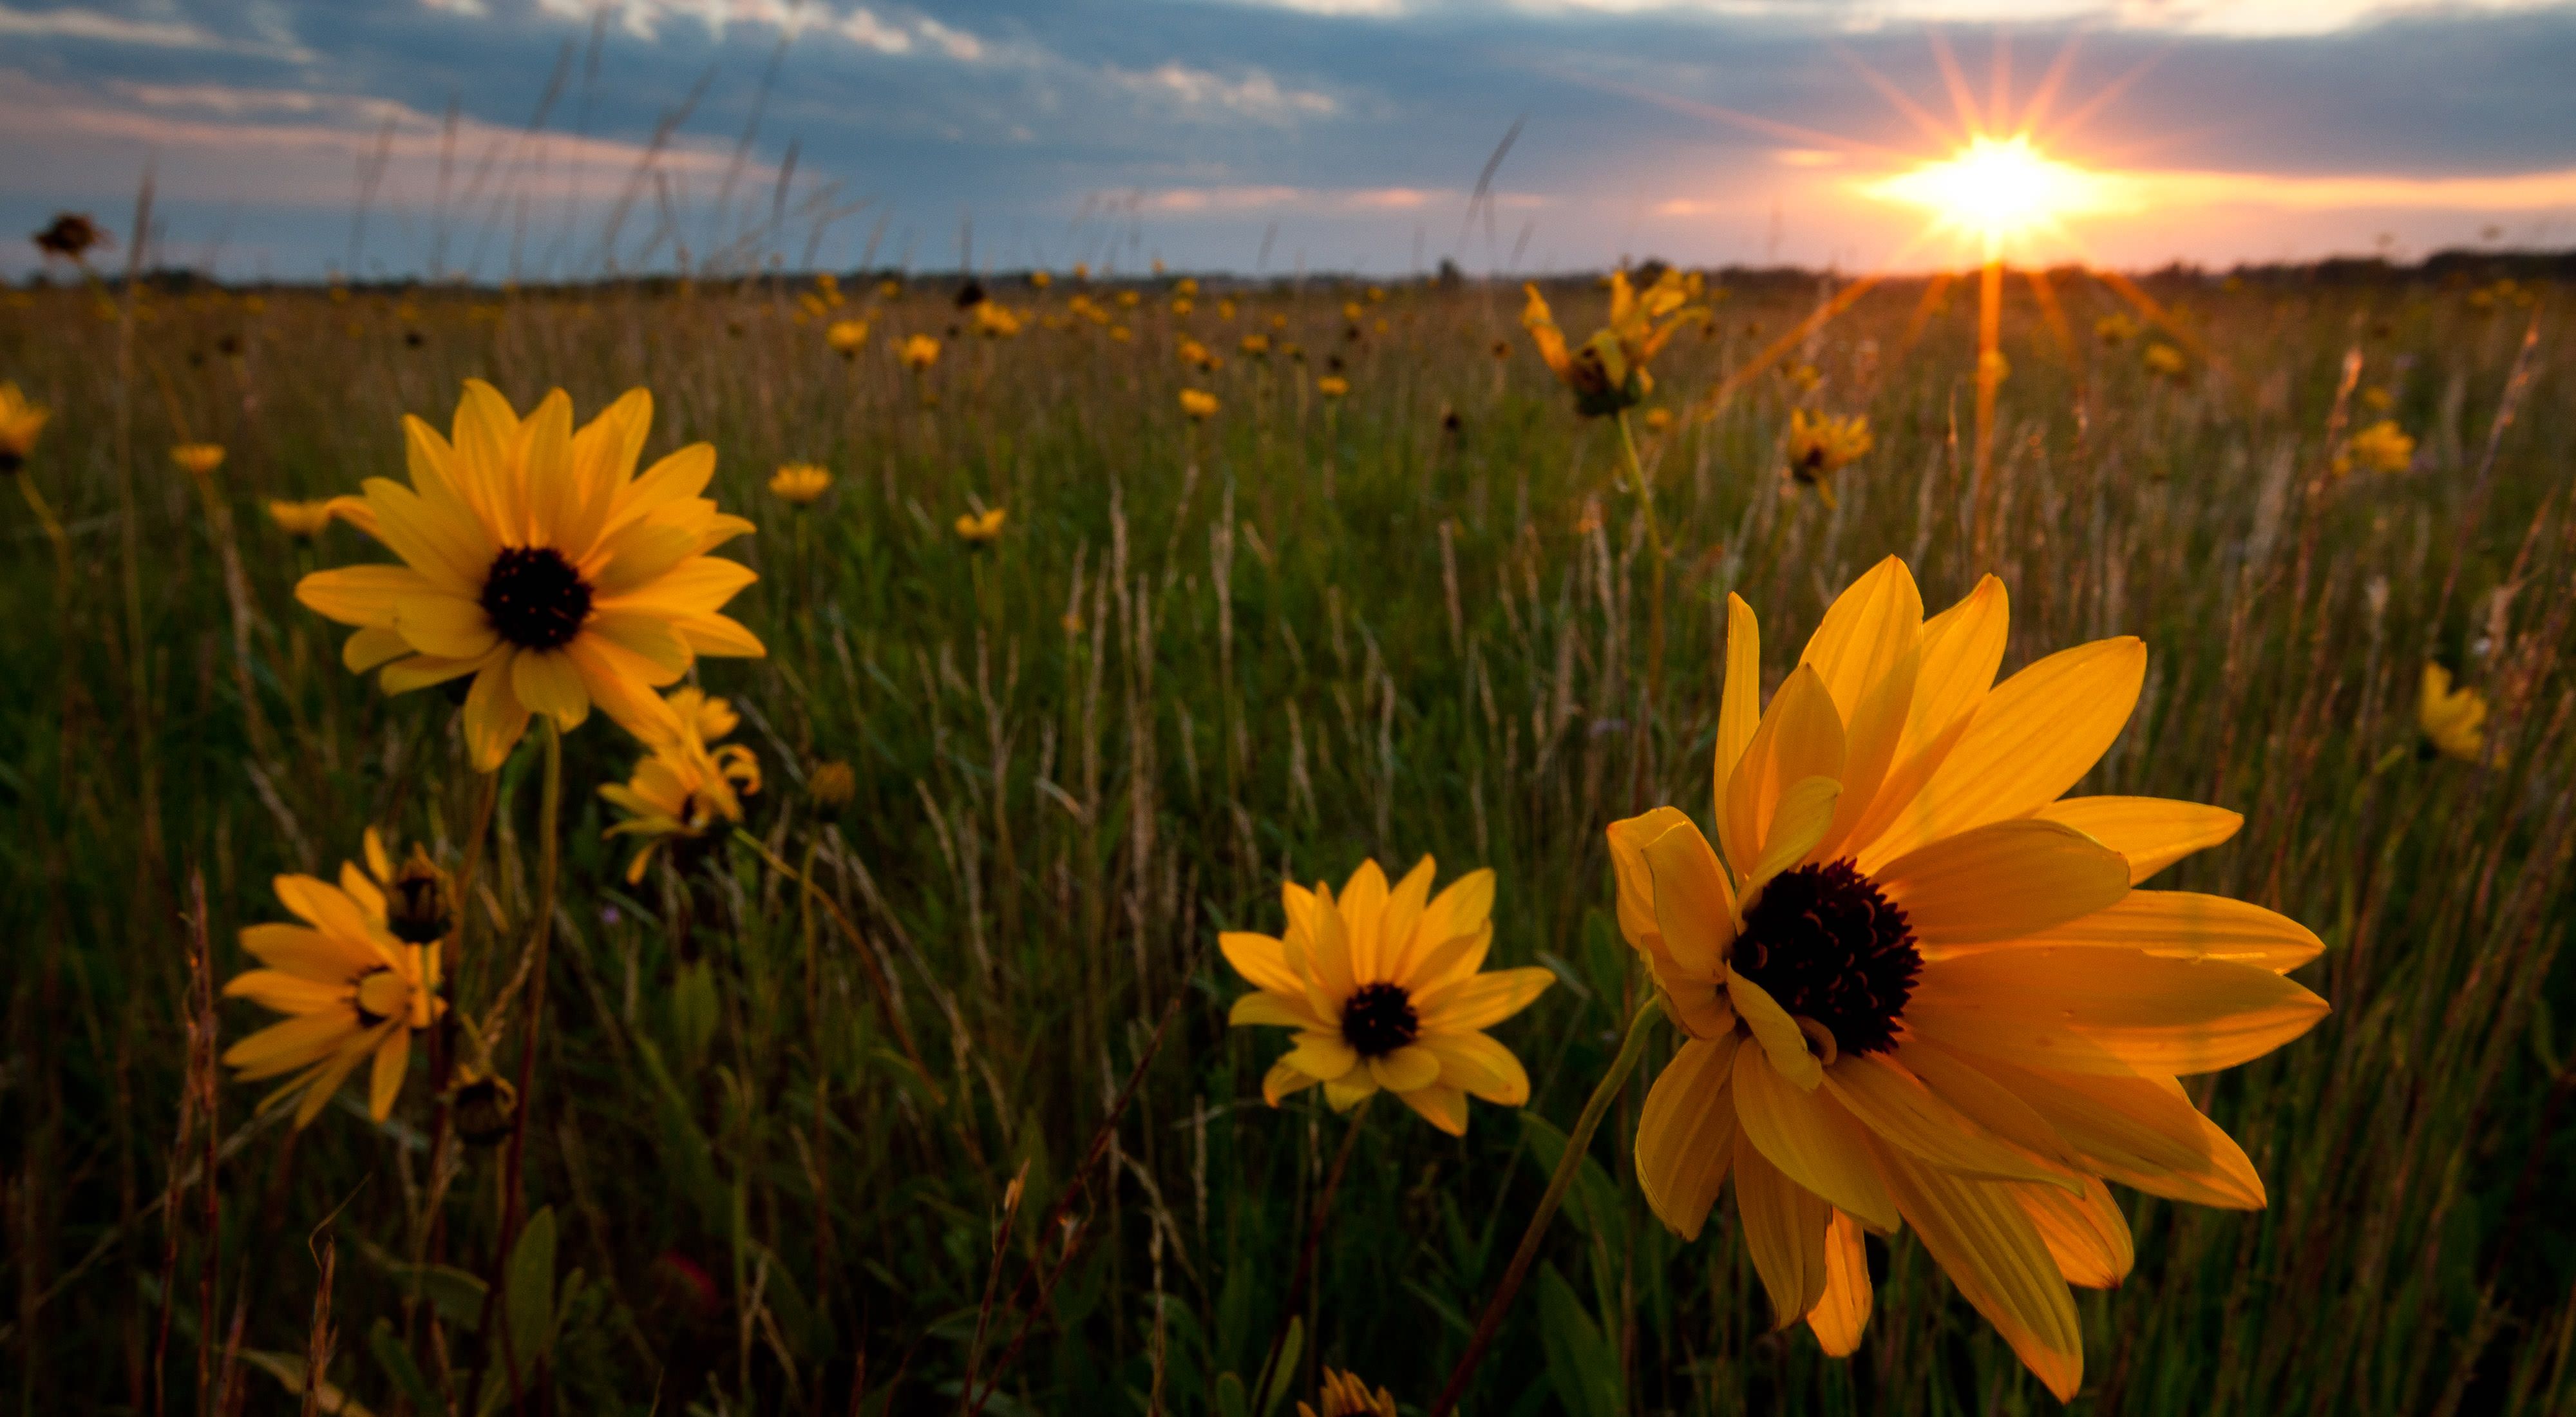 Closeup of large flowers with dark centers and long yellow petals in a field of tall grasses as the sun sets in the distance.